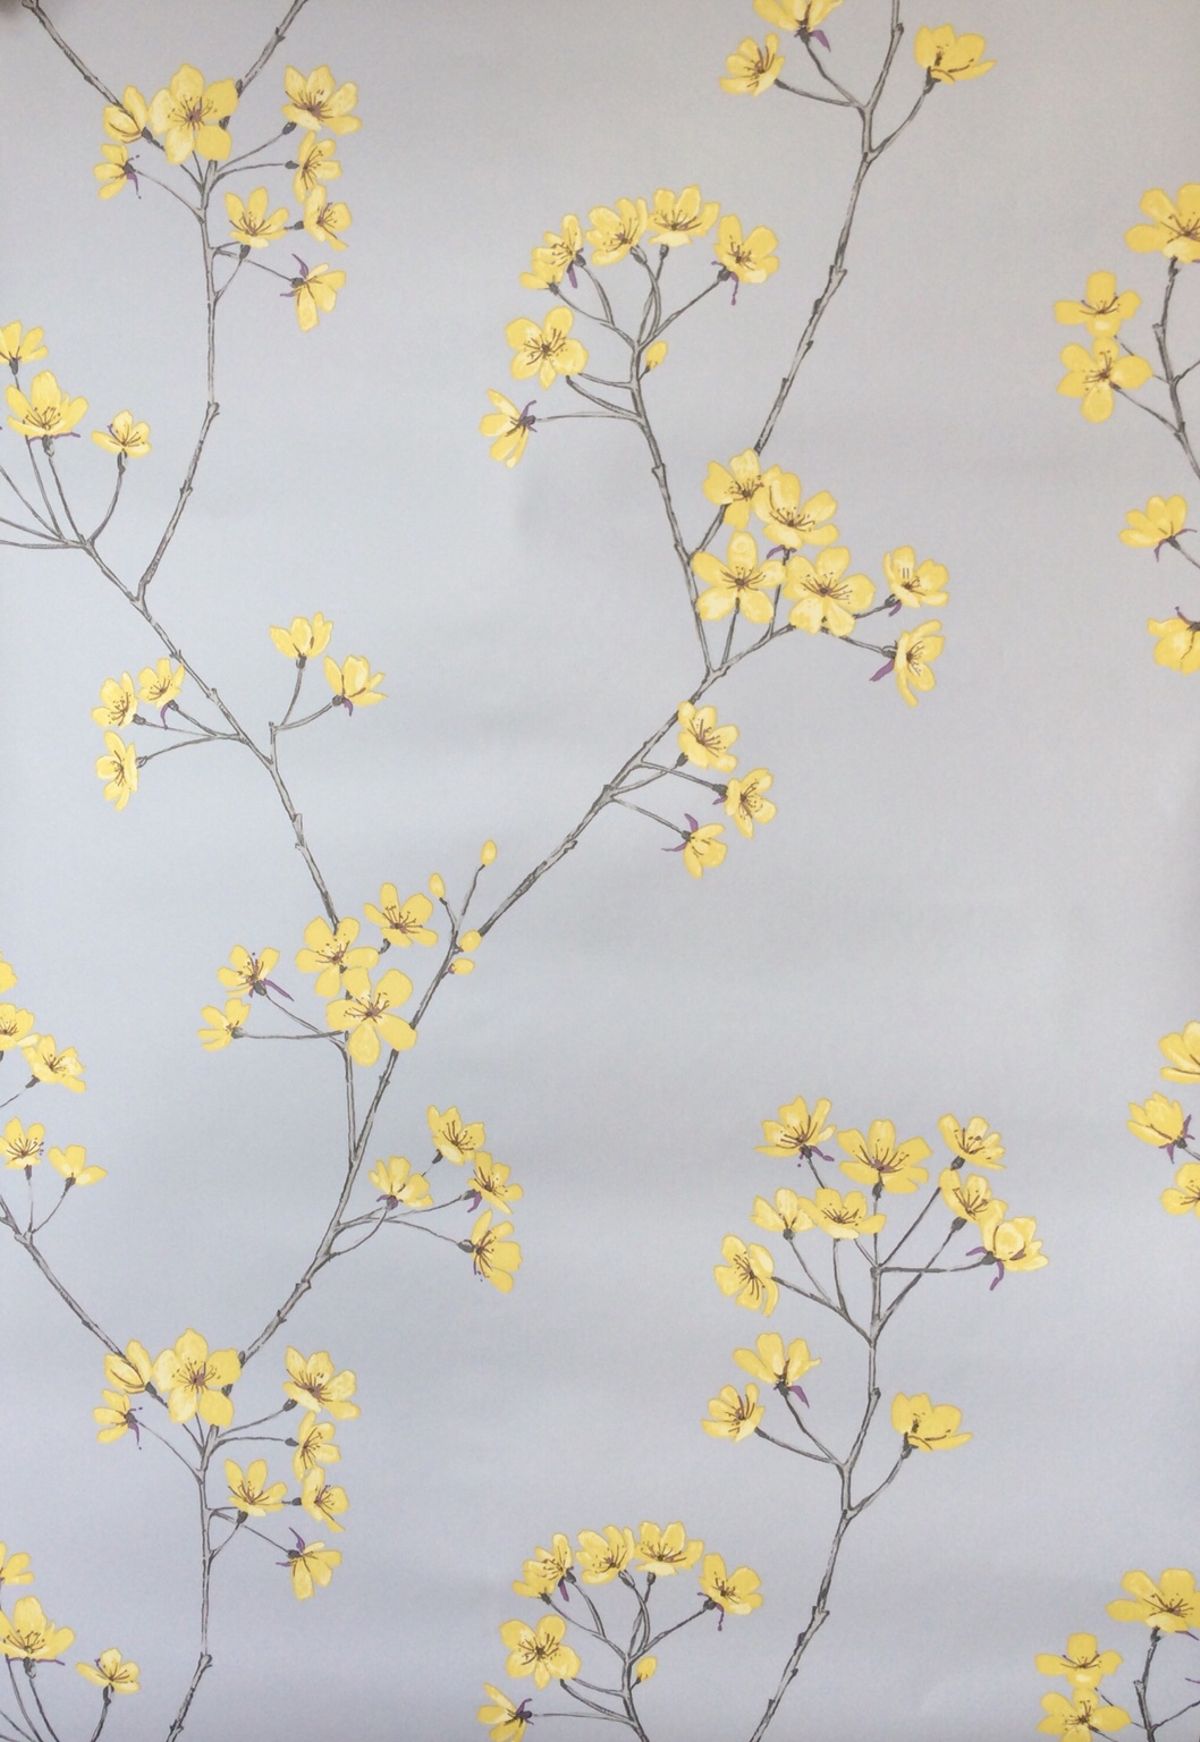 Brand New Homebase Wallpaper From Home Of Colour Range - Tansy - HD Wallpaper 